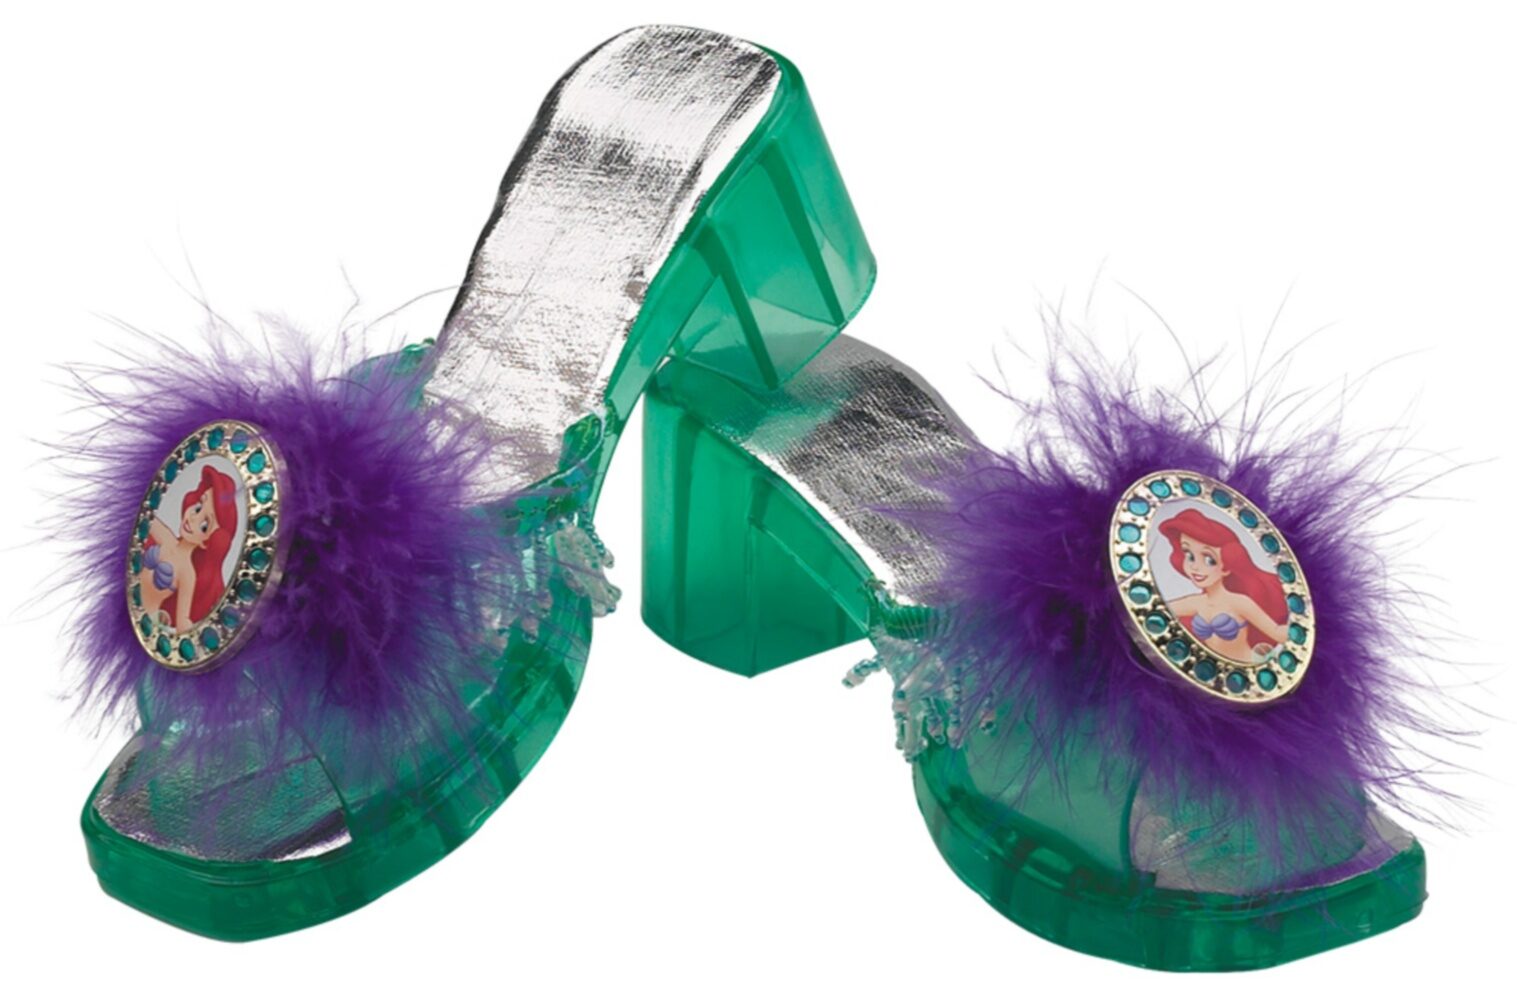 childrens heeled jelly shoes